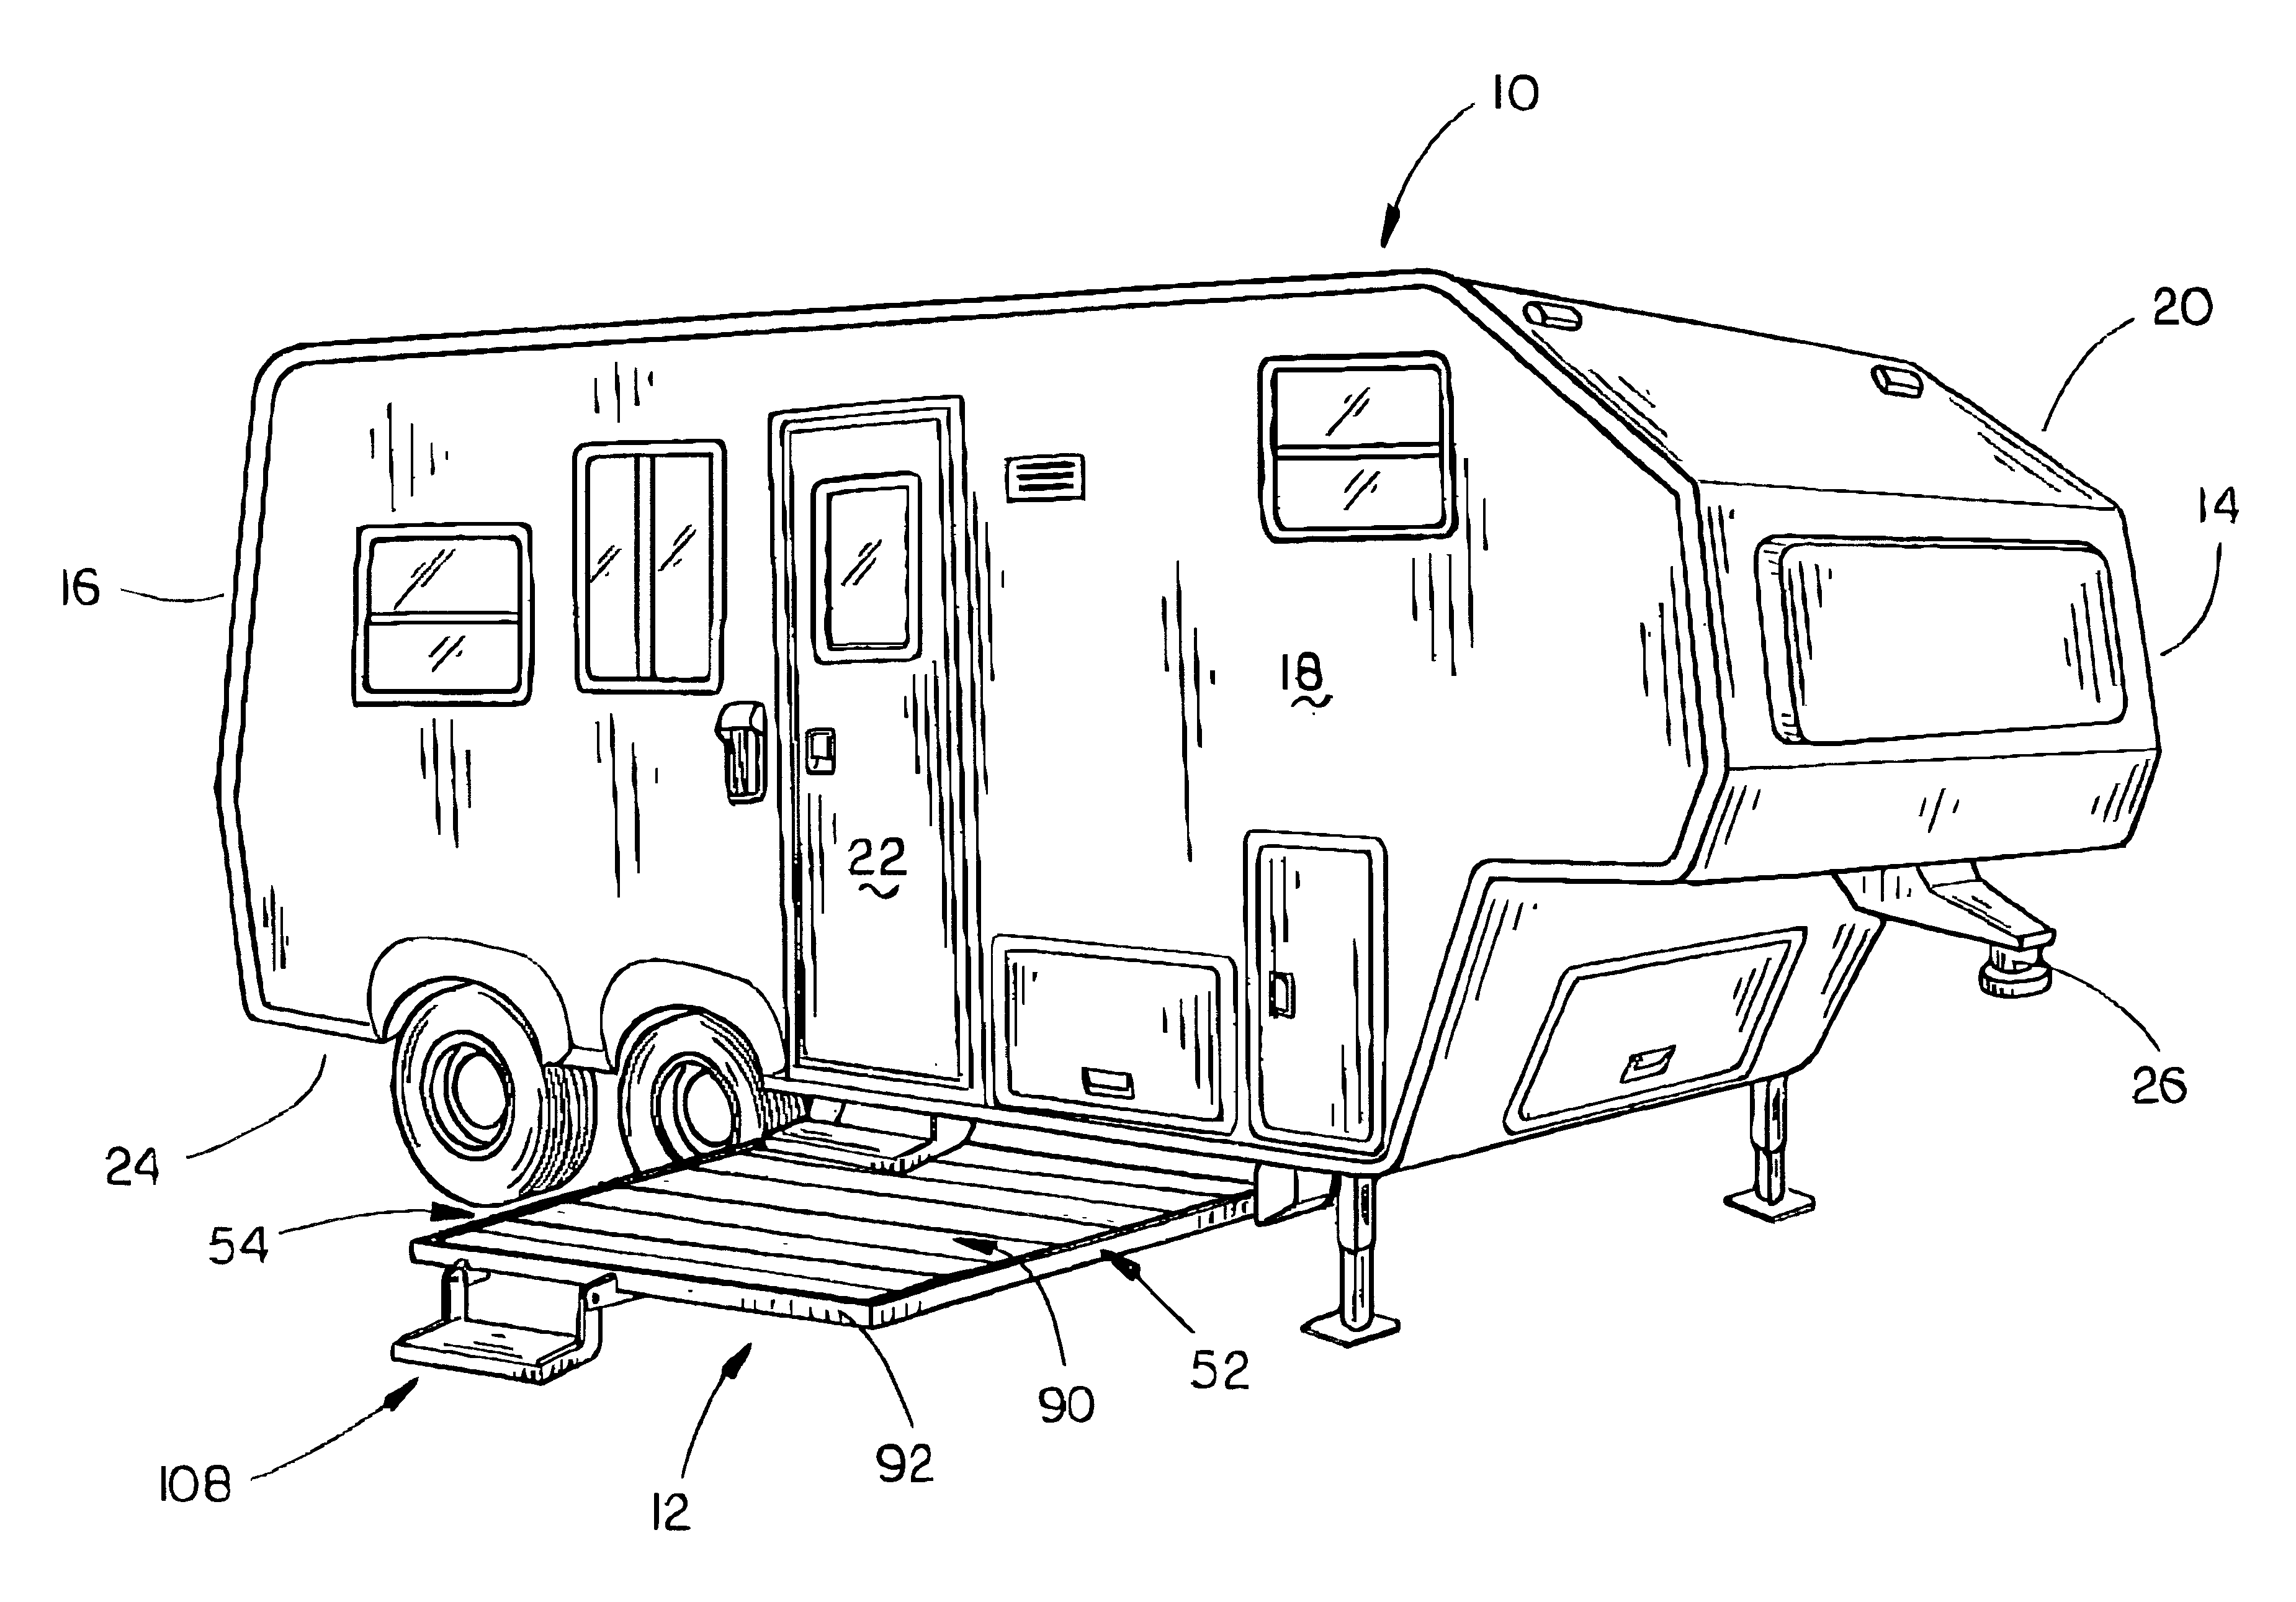 Slide-out deck for a recreational vehicle